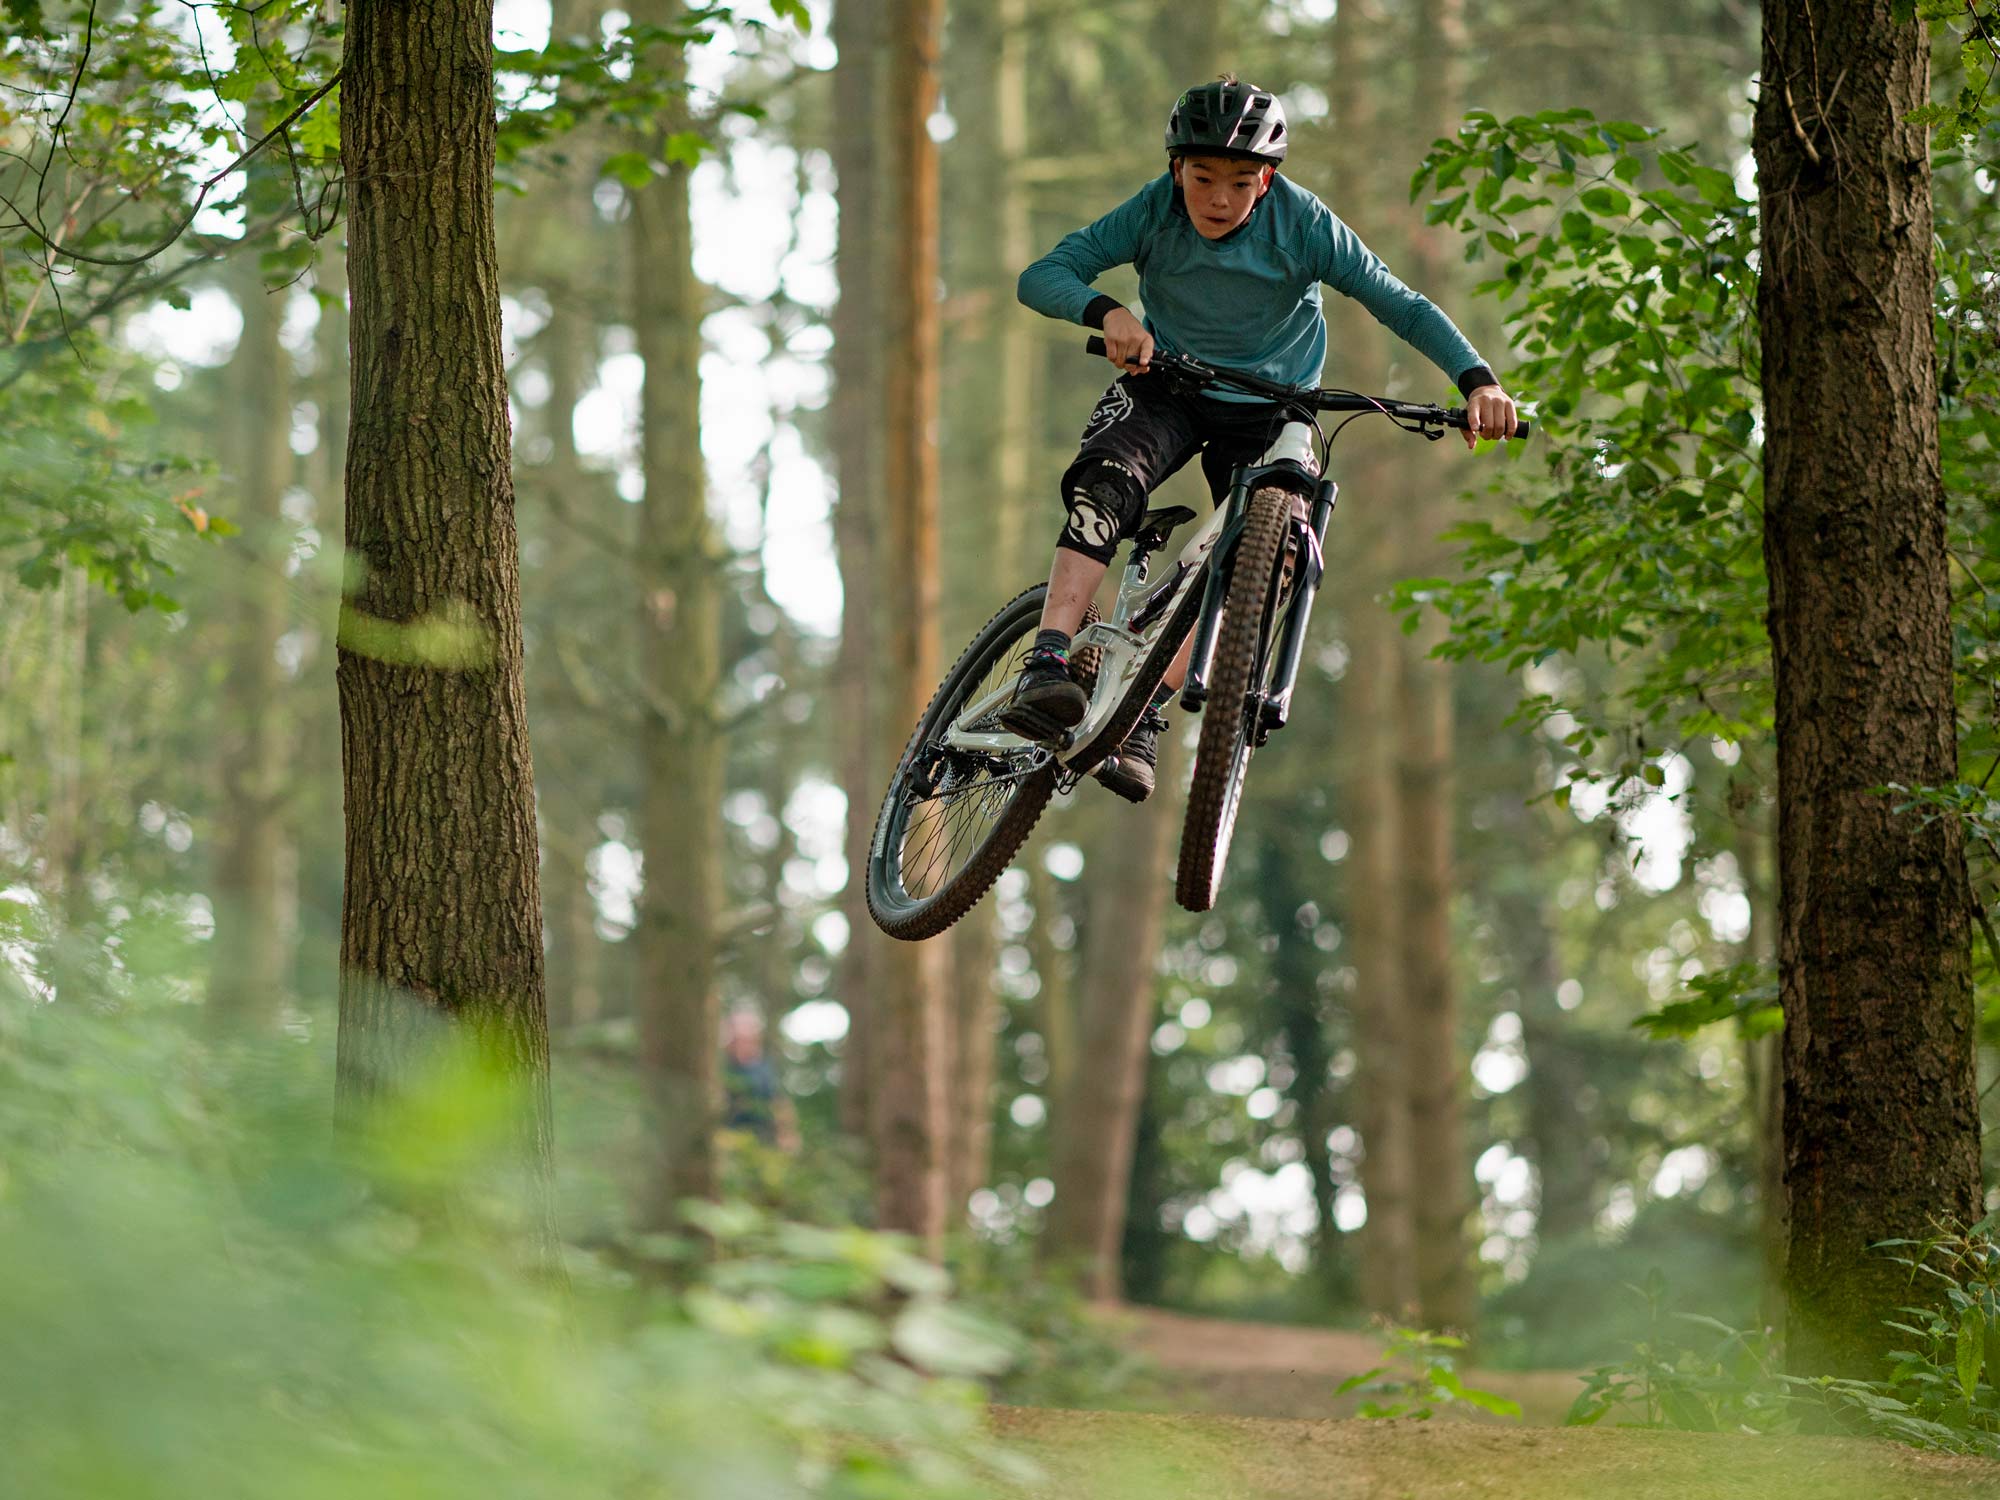 2022 Canyon Spectral AL affordable alloy trail all-mountain bike, photo by Roo Fowler, young hero airtime